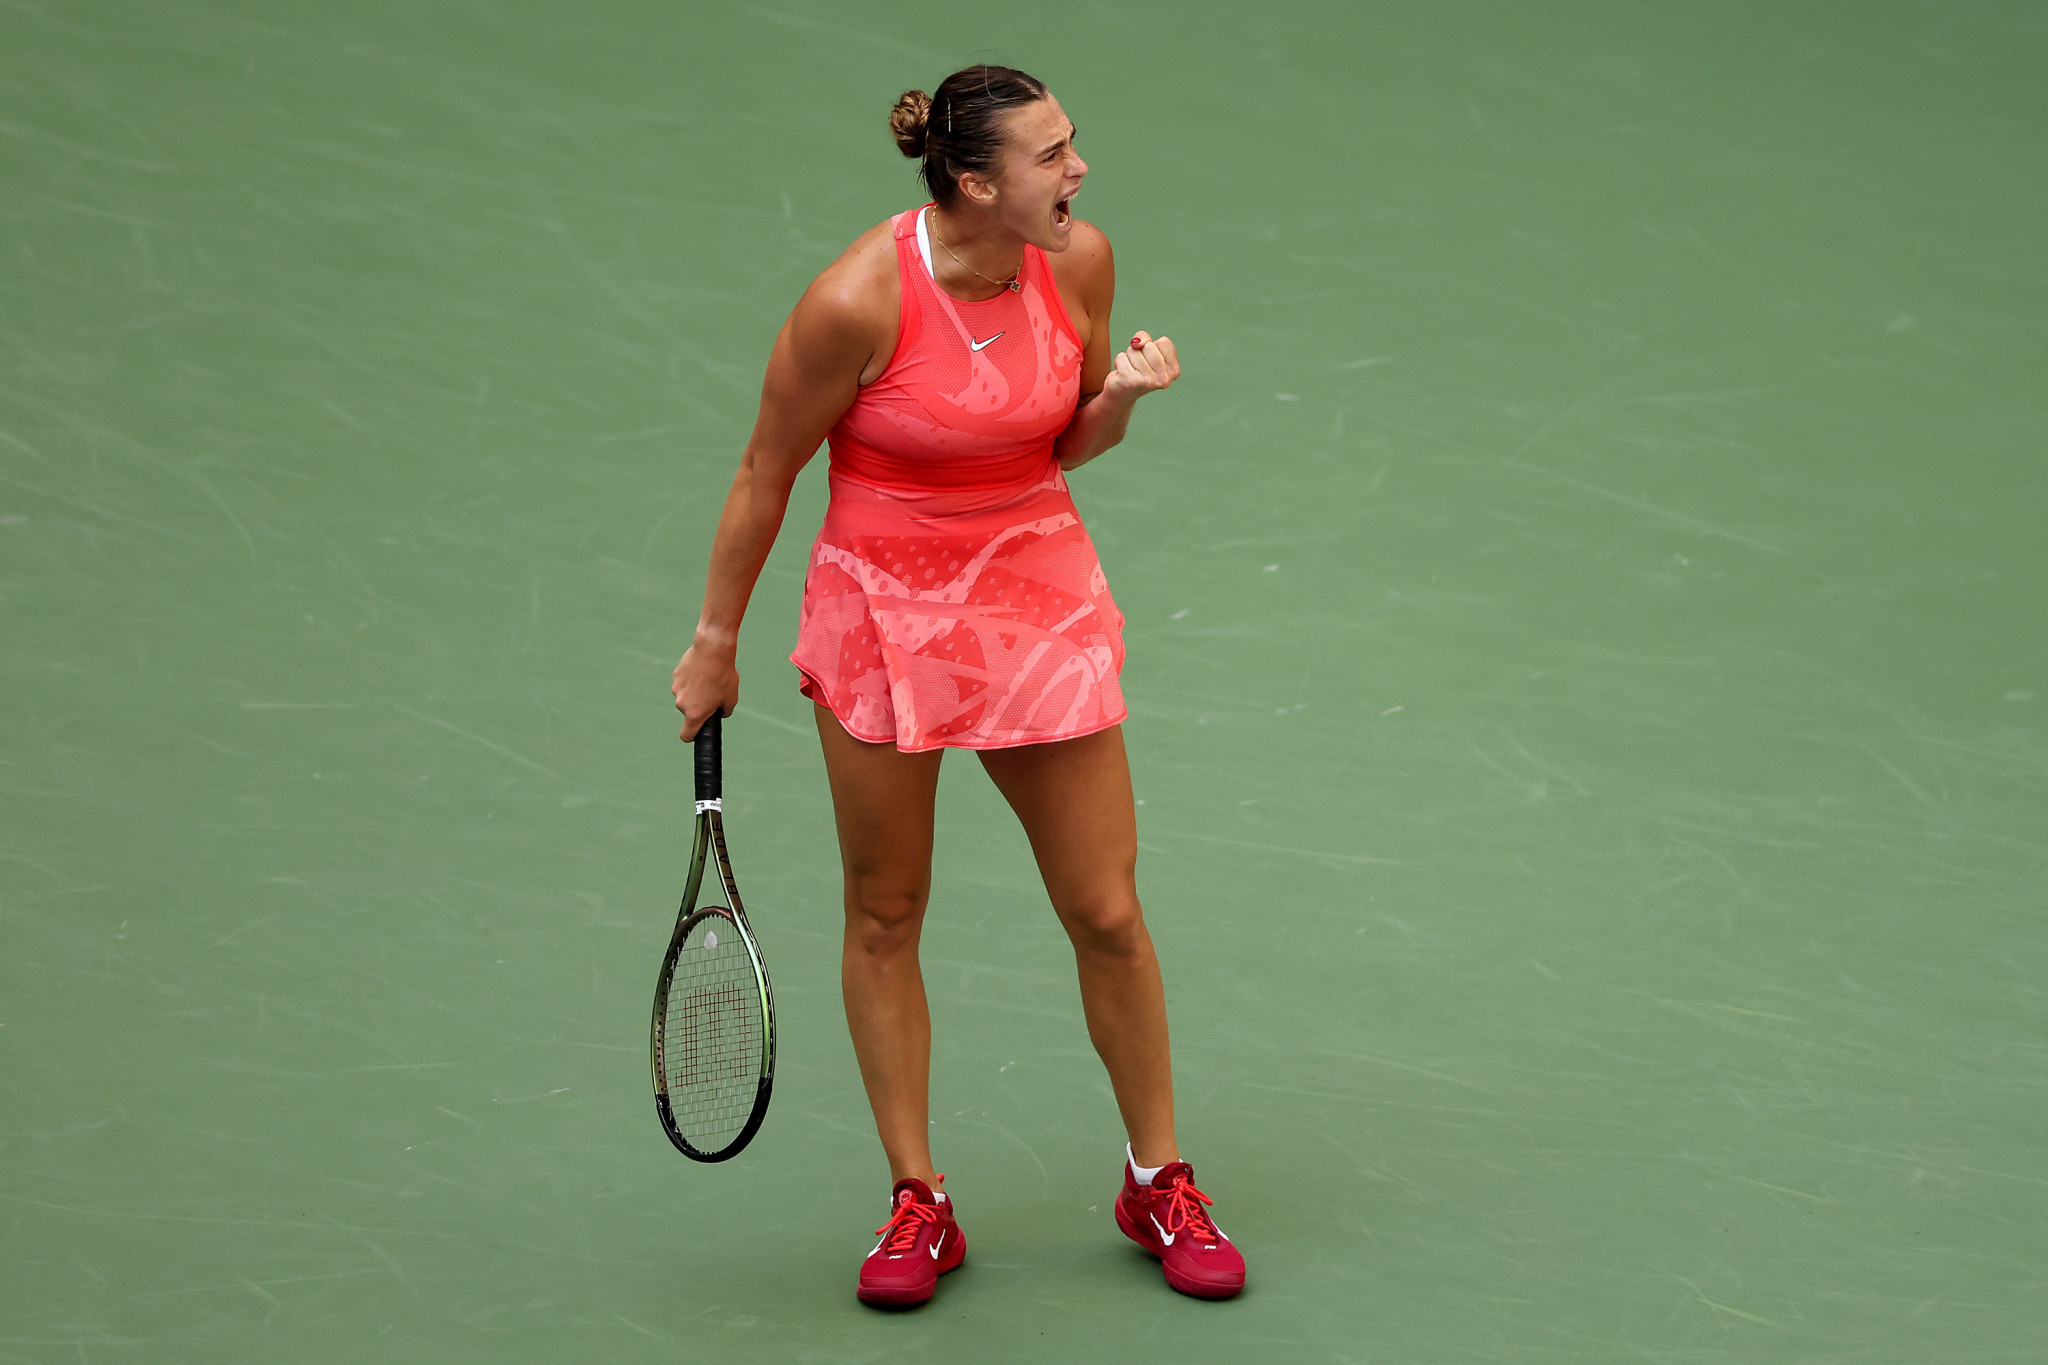 Aryna Sabalenka continued to show why she is the deserving world number one in waiting, with a dominant 6-1, 6-4 win against Zheng Qinwen of China ©Getty Images